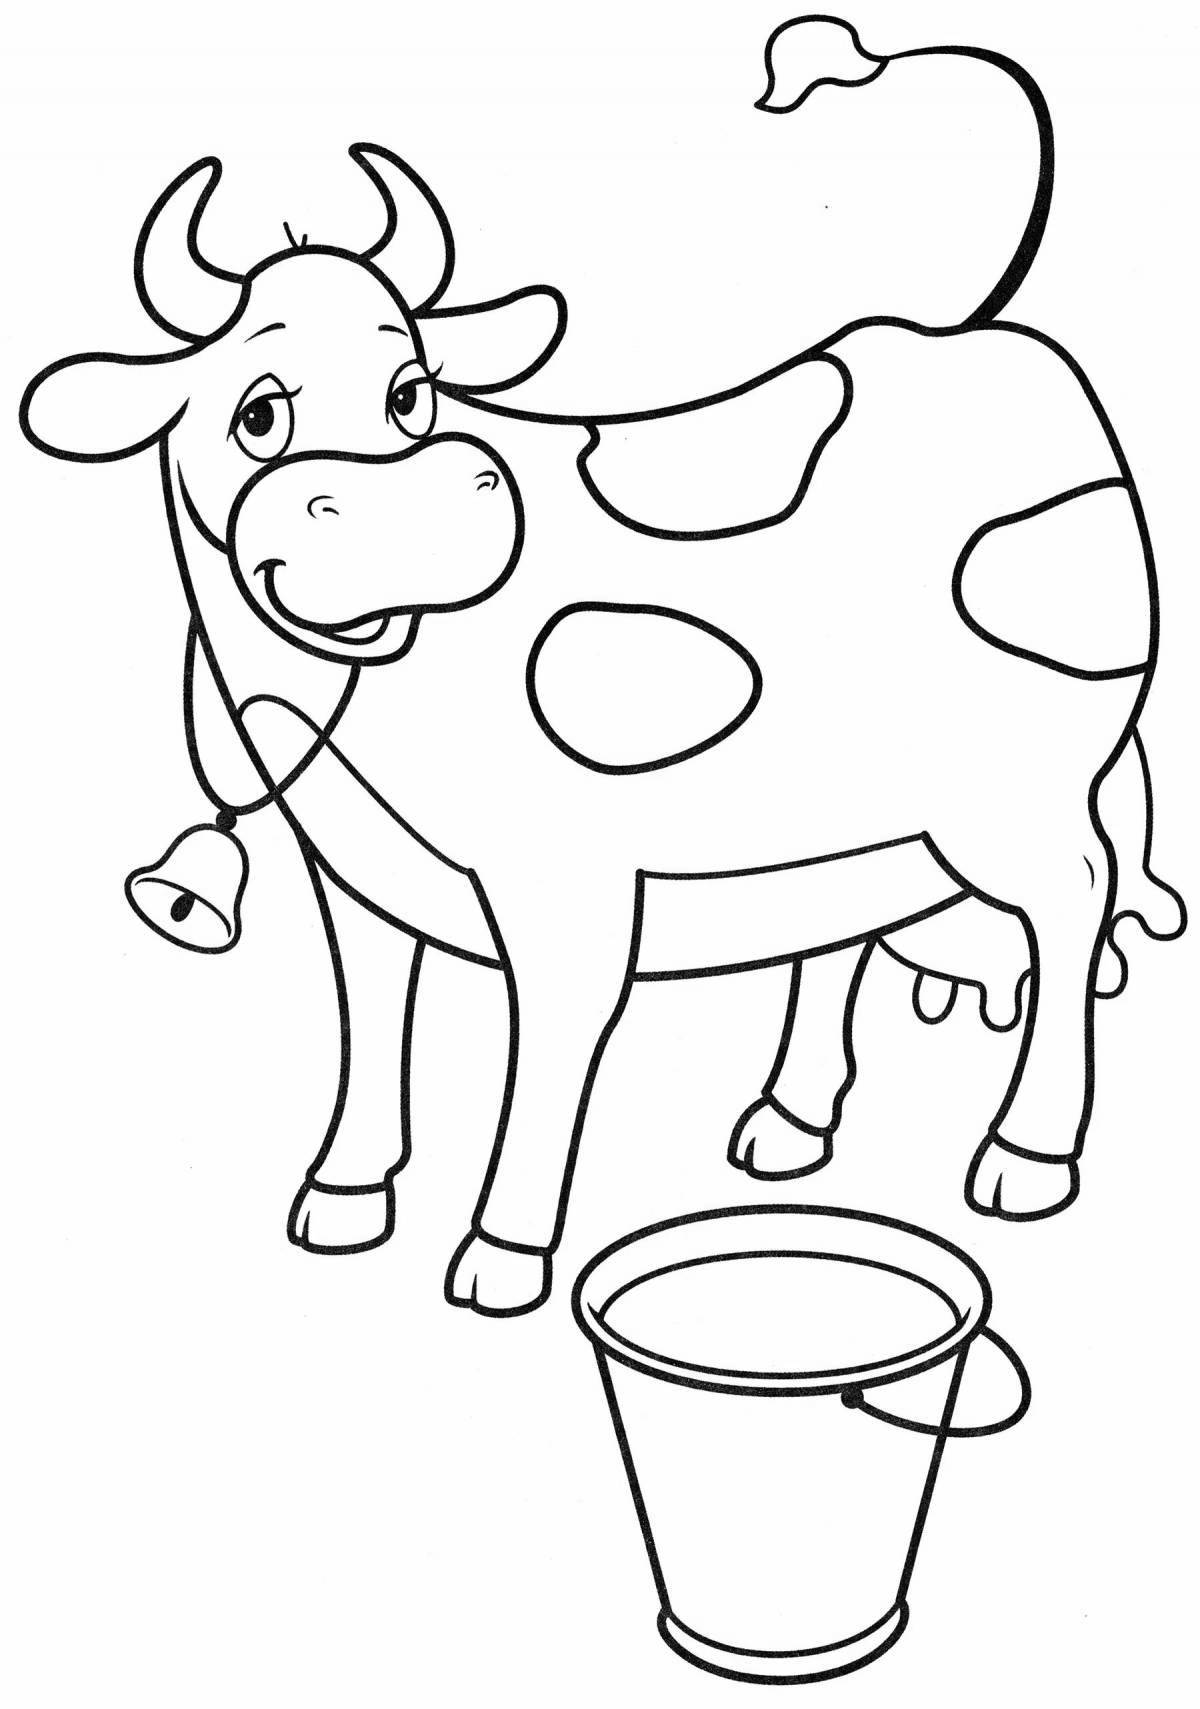 Cow coloring page for kids